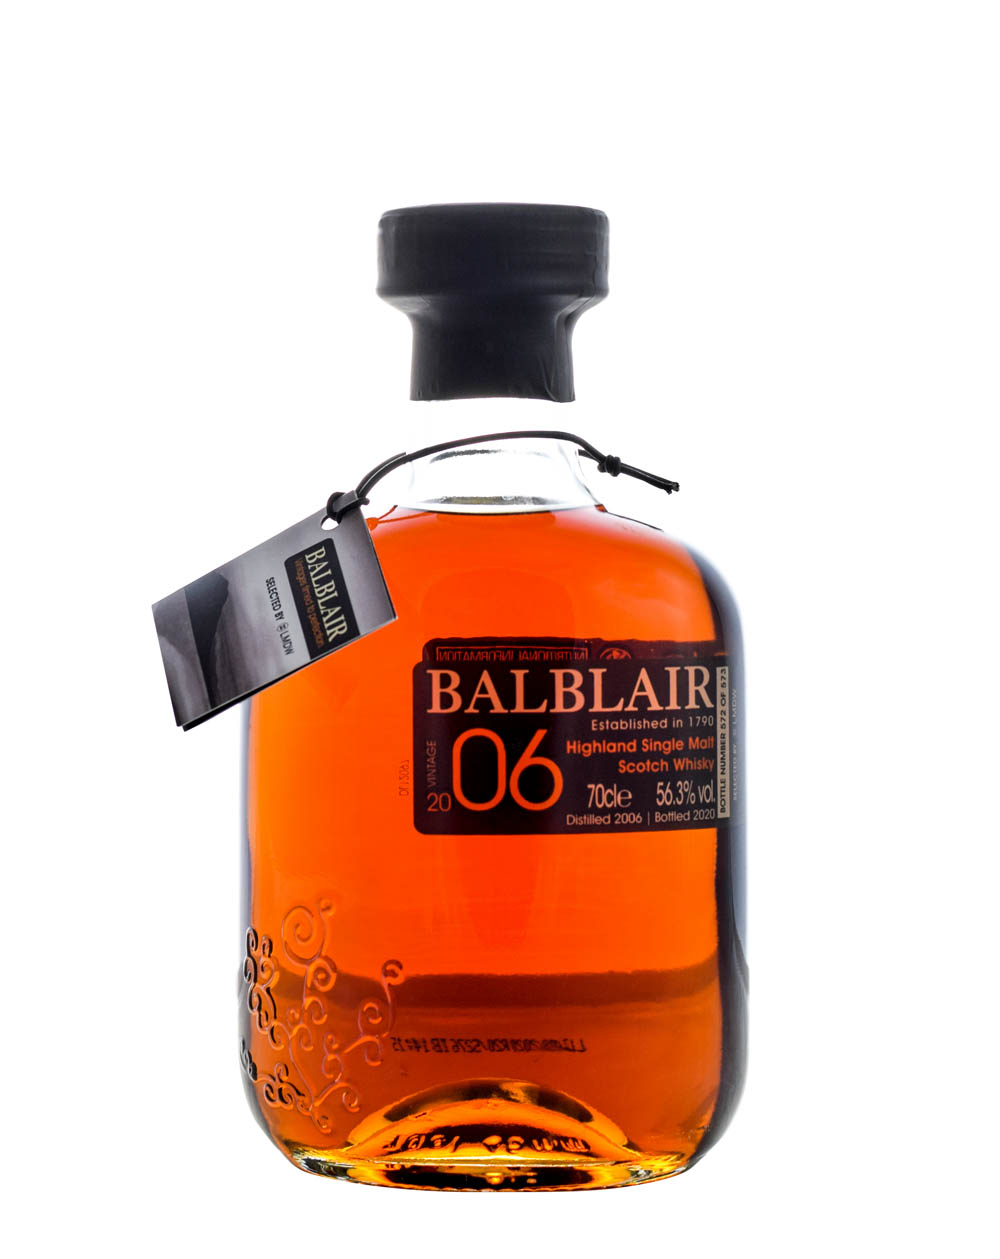 Balblair 2006 Single Barrel - Selected by LMDW (14 Years Old) Musthave Malts MHM